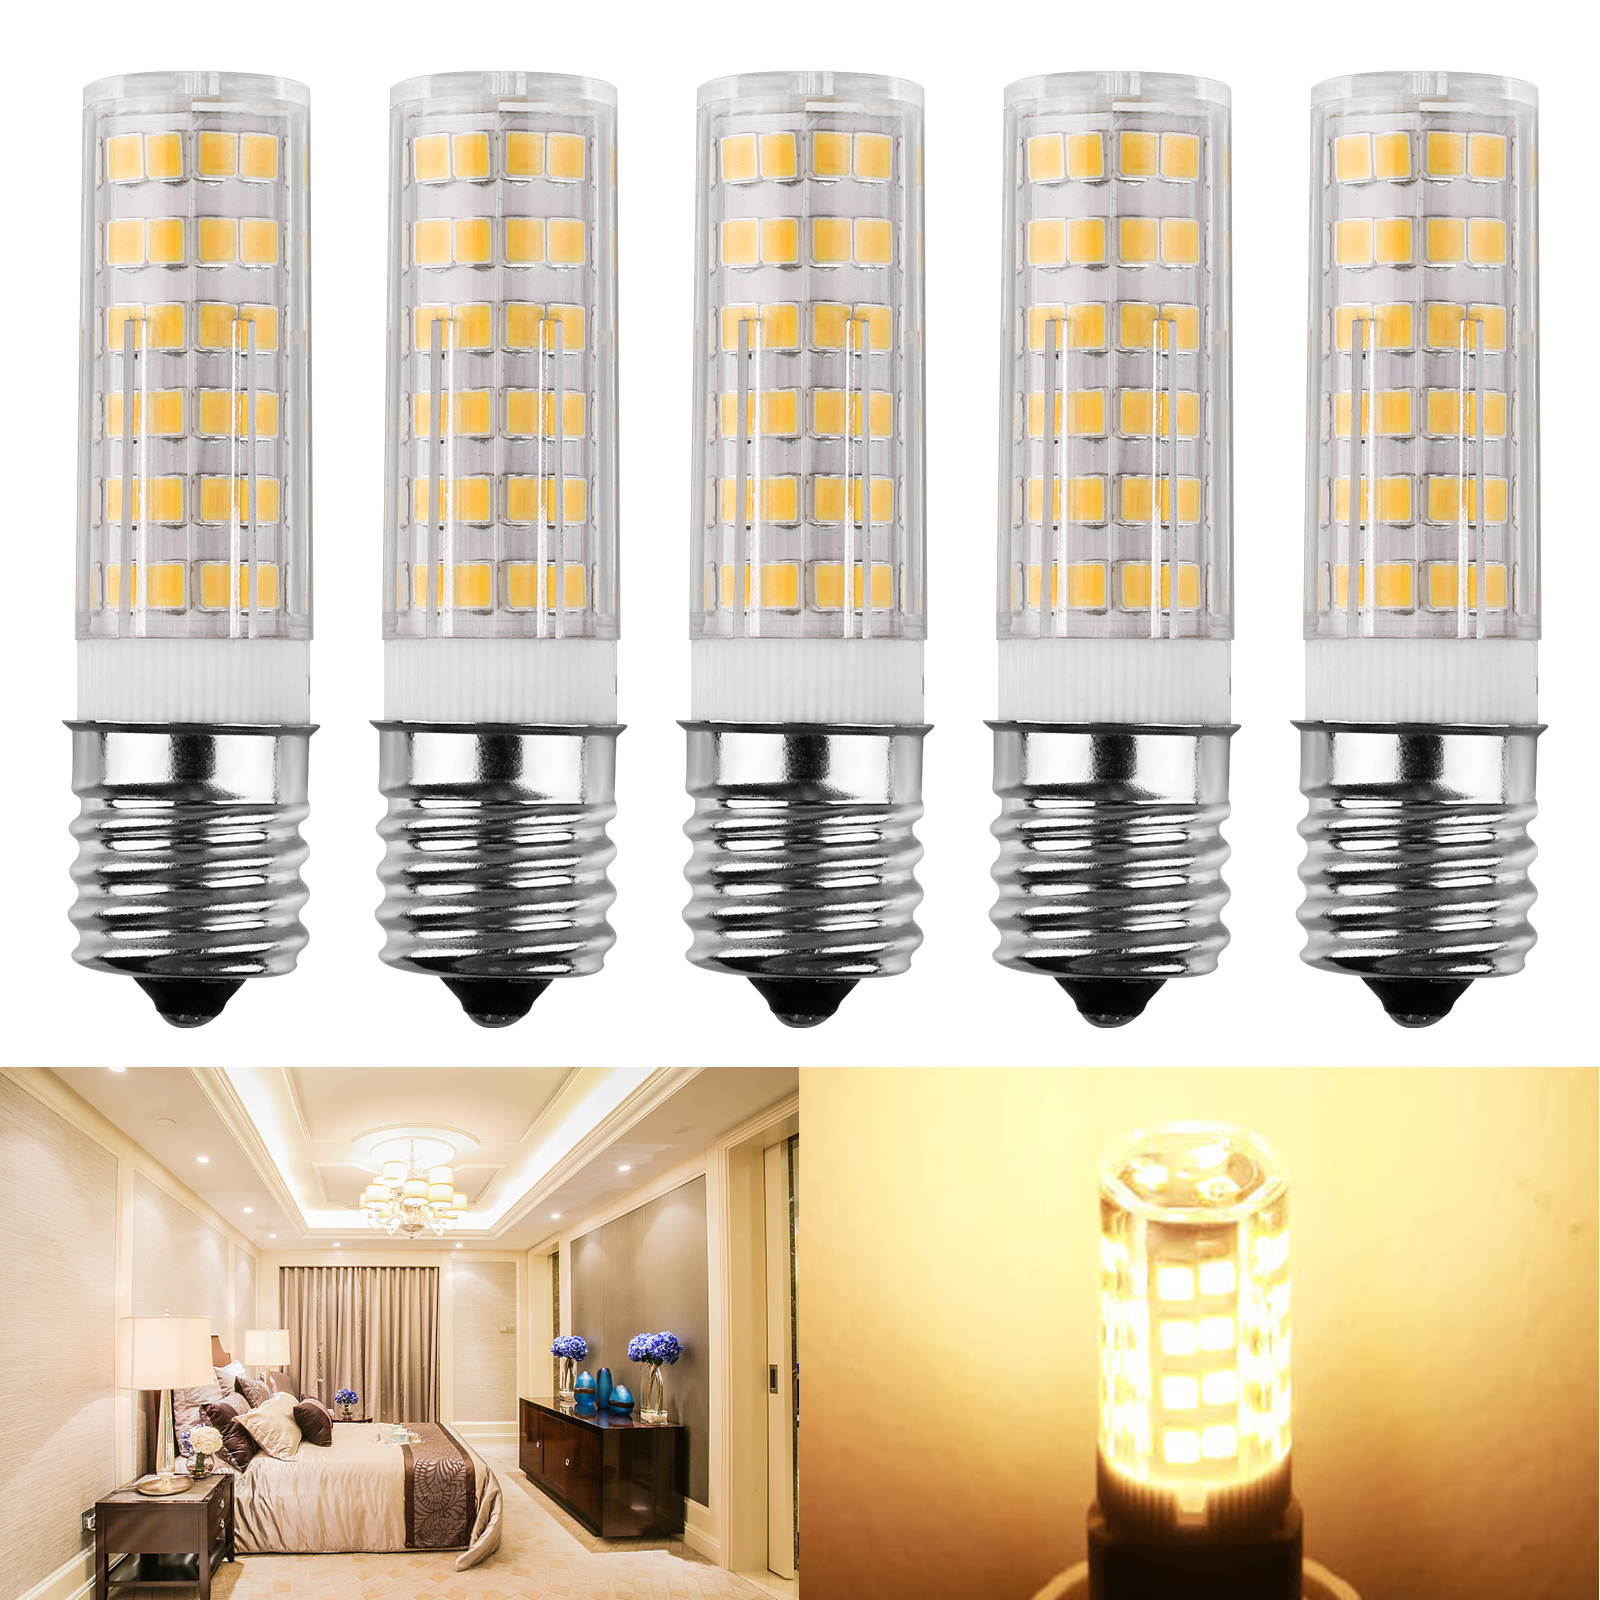 5Pcs Microwave LED Replacement Light Bulb for Appliance E17 Socket 7W